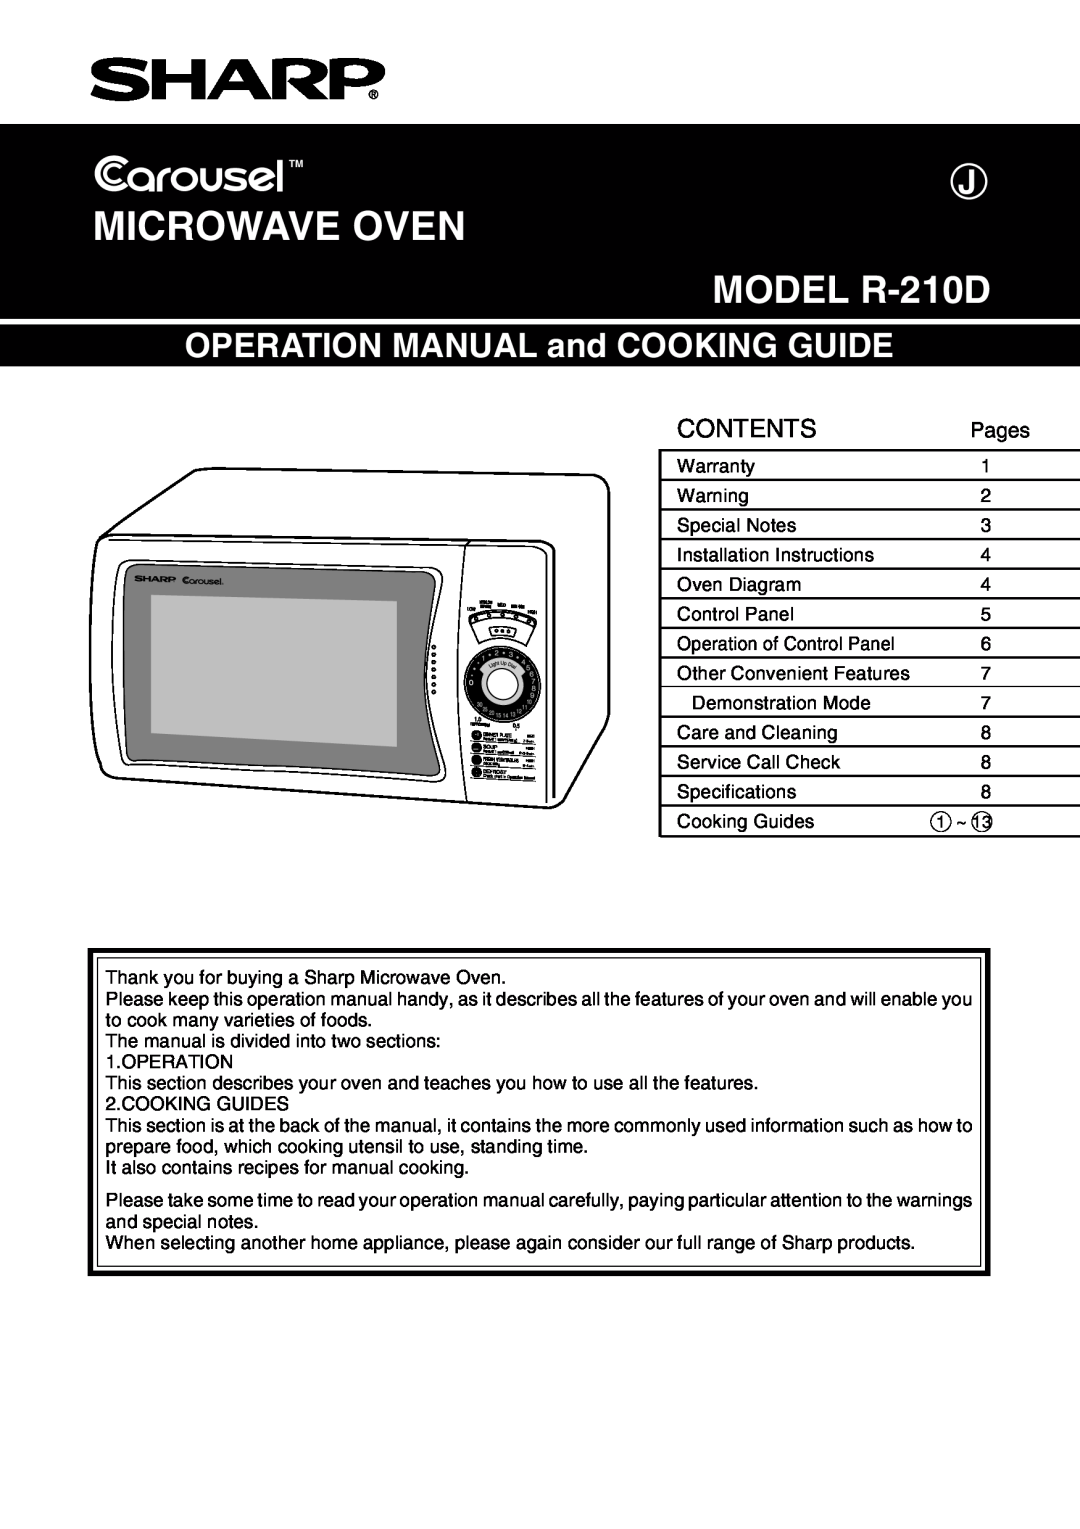 Sharp operation manual Pages, Microwave Oven, MODEL R-210D, Contents 